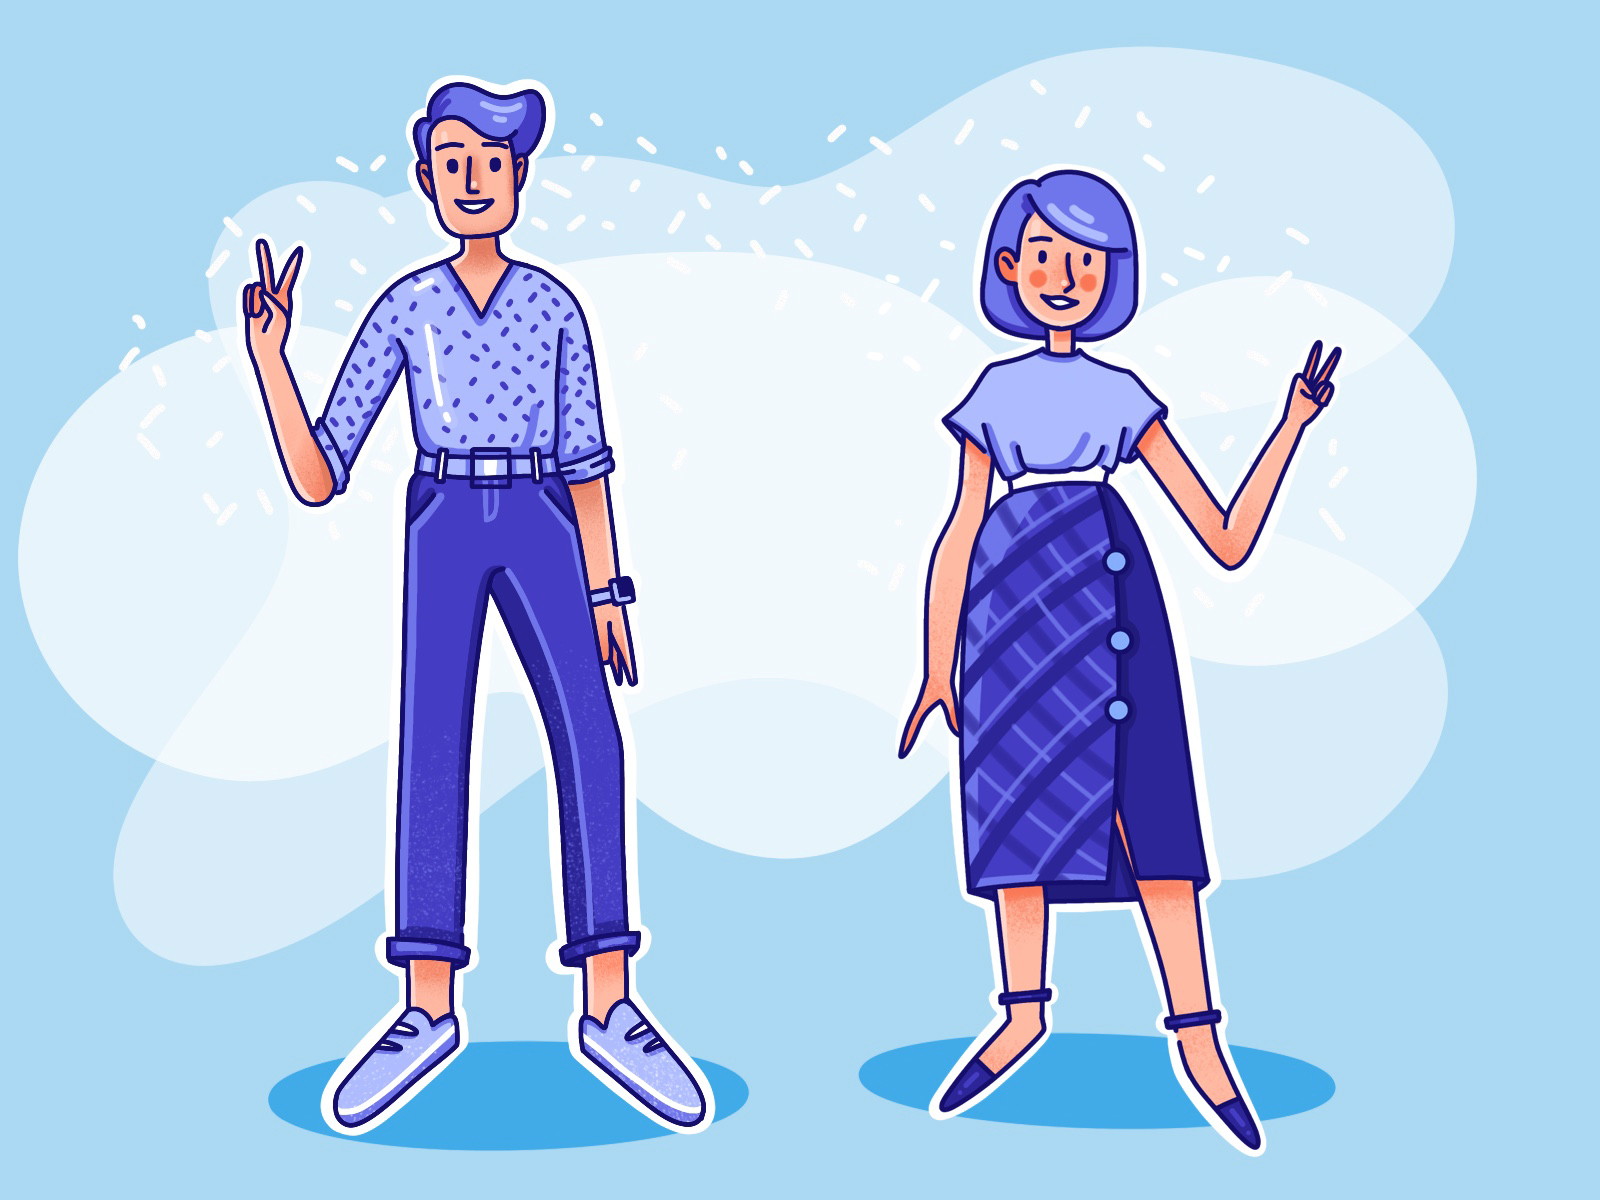 Characters for the app by Anastasiia on Dribbble